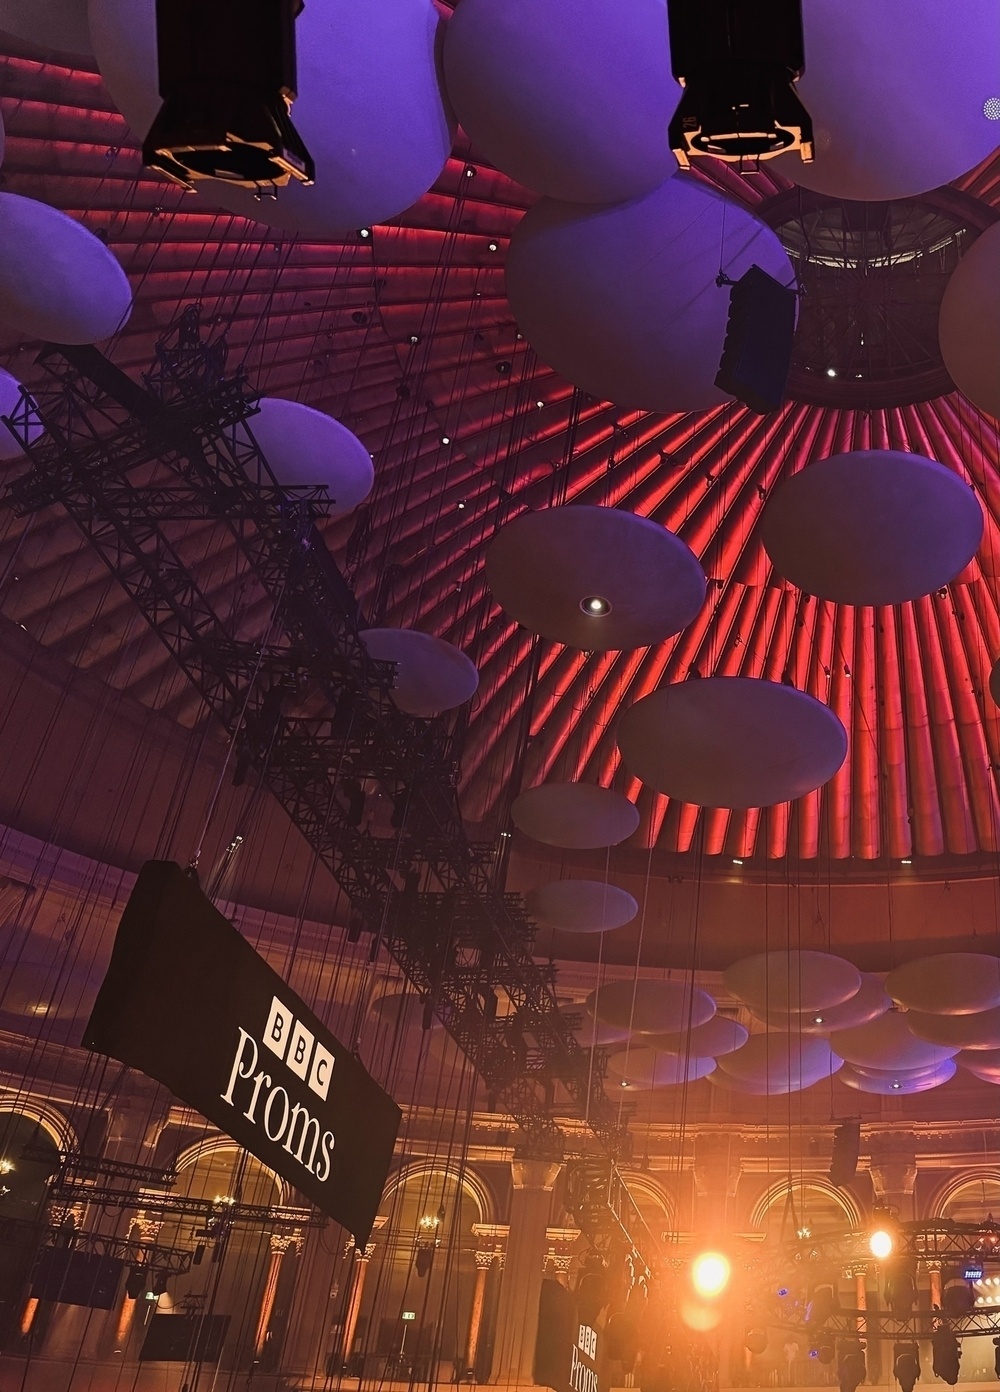 The ceiling of the Royal Albert Hall with a BBC Proms banner hanging from it.